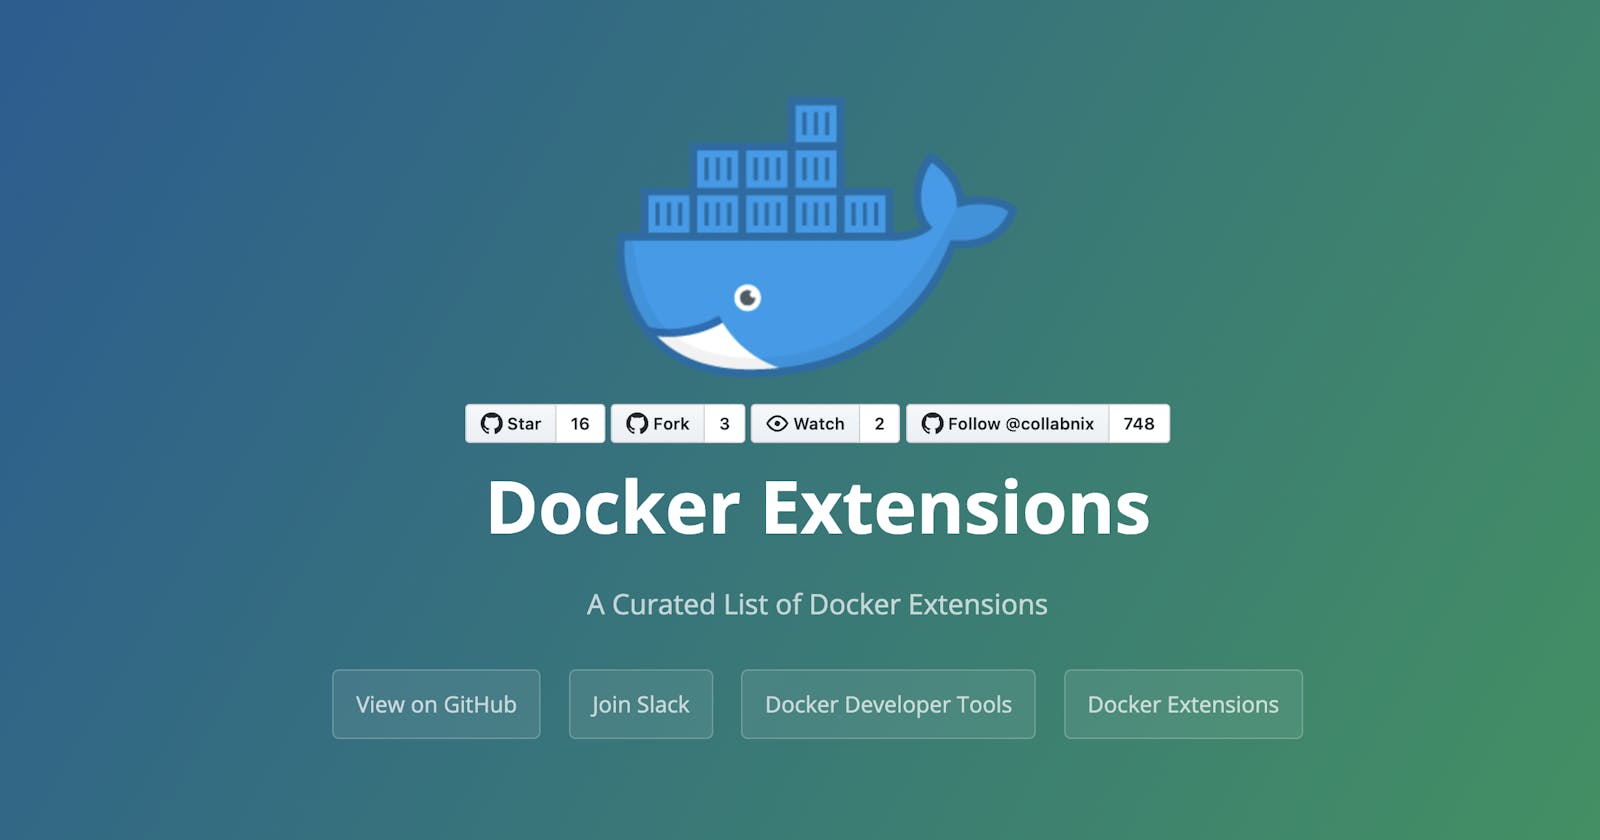 A Curated List of Docker Extensions